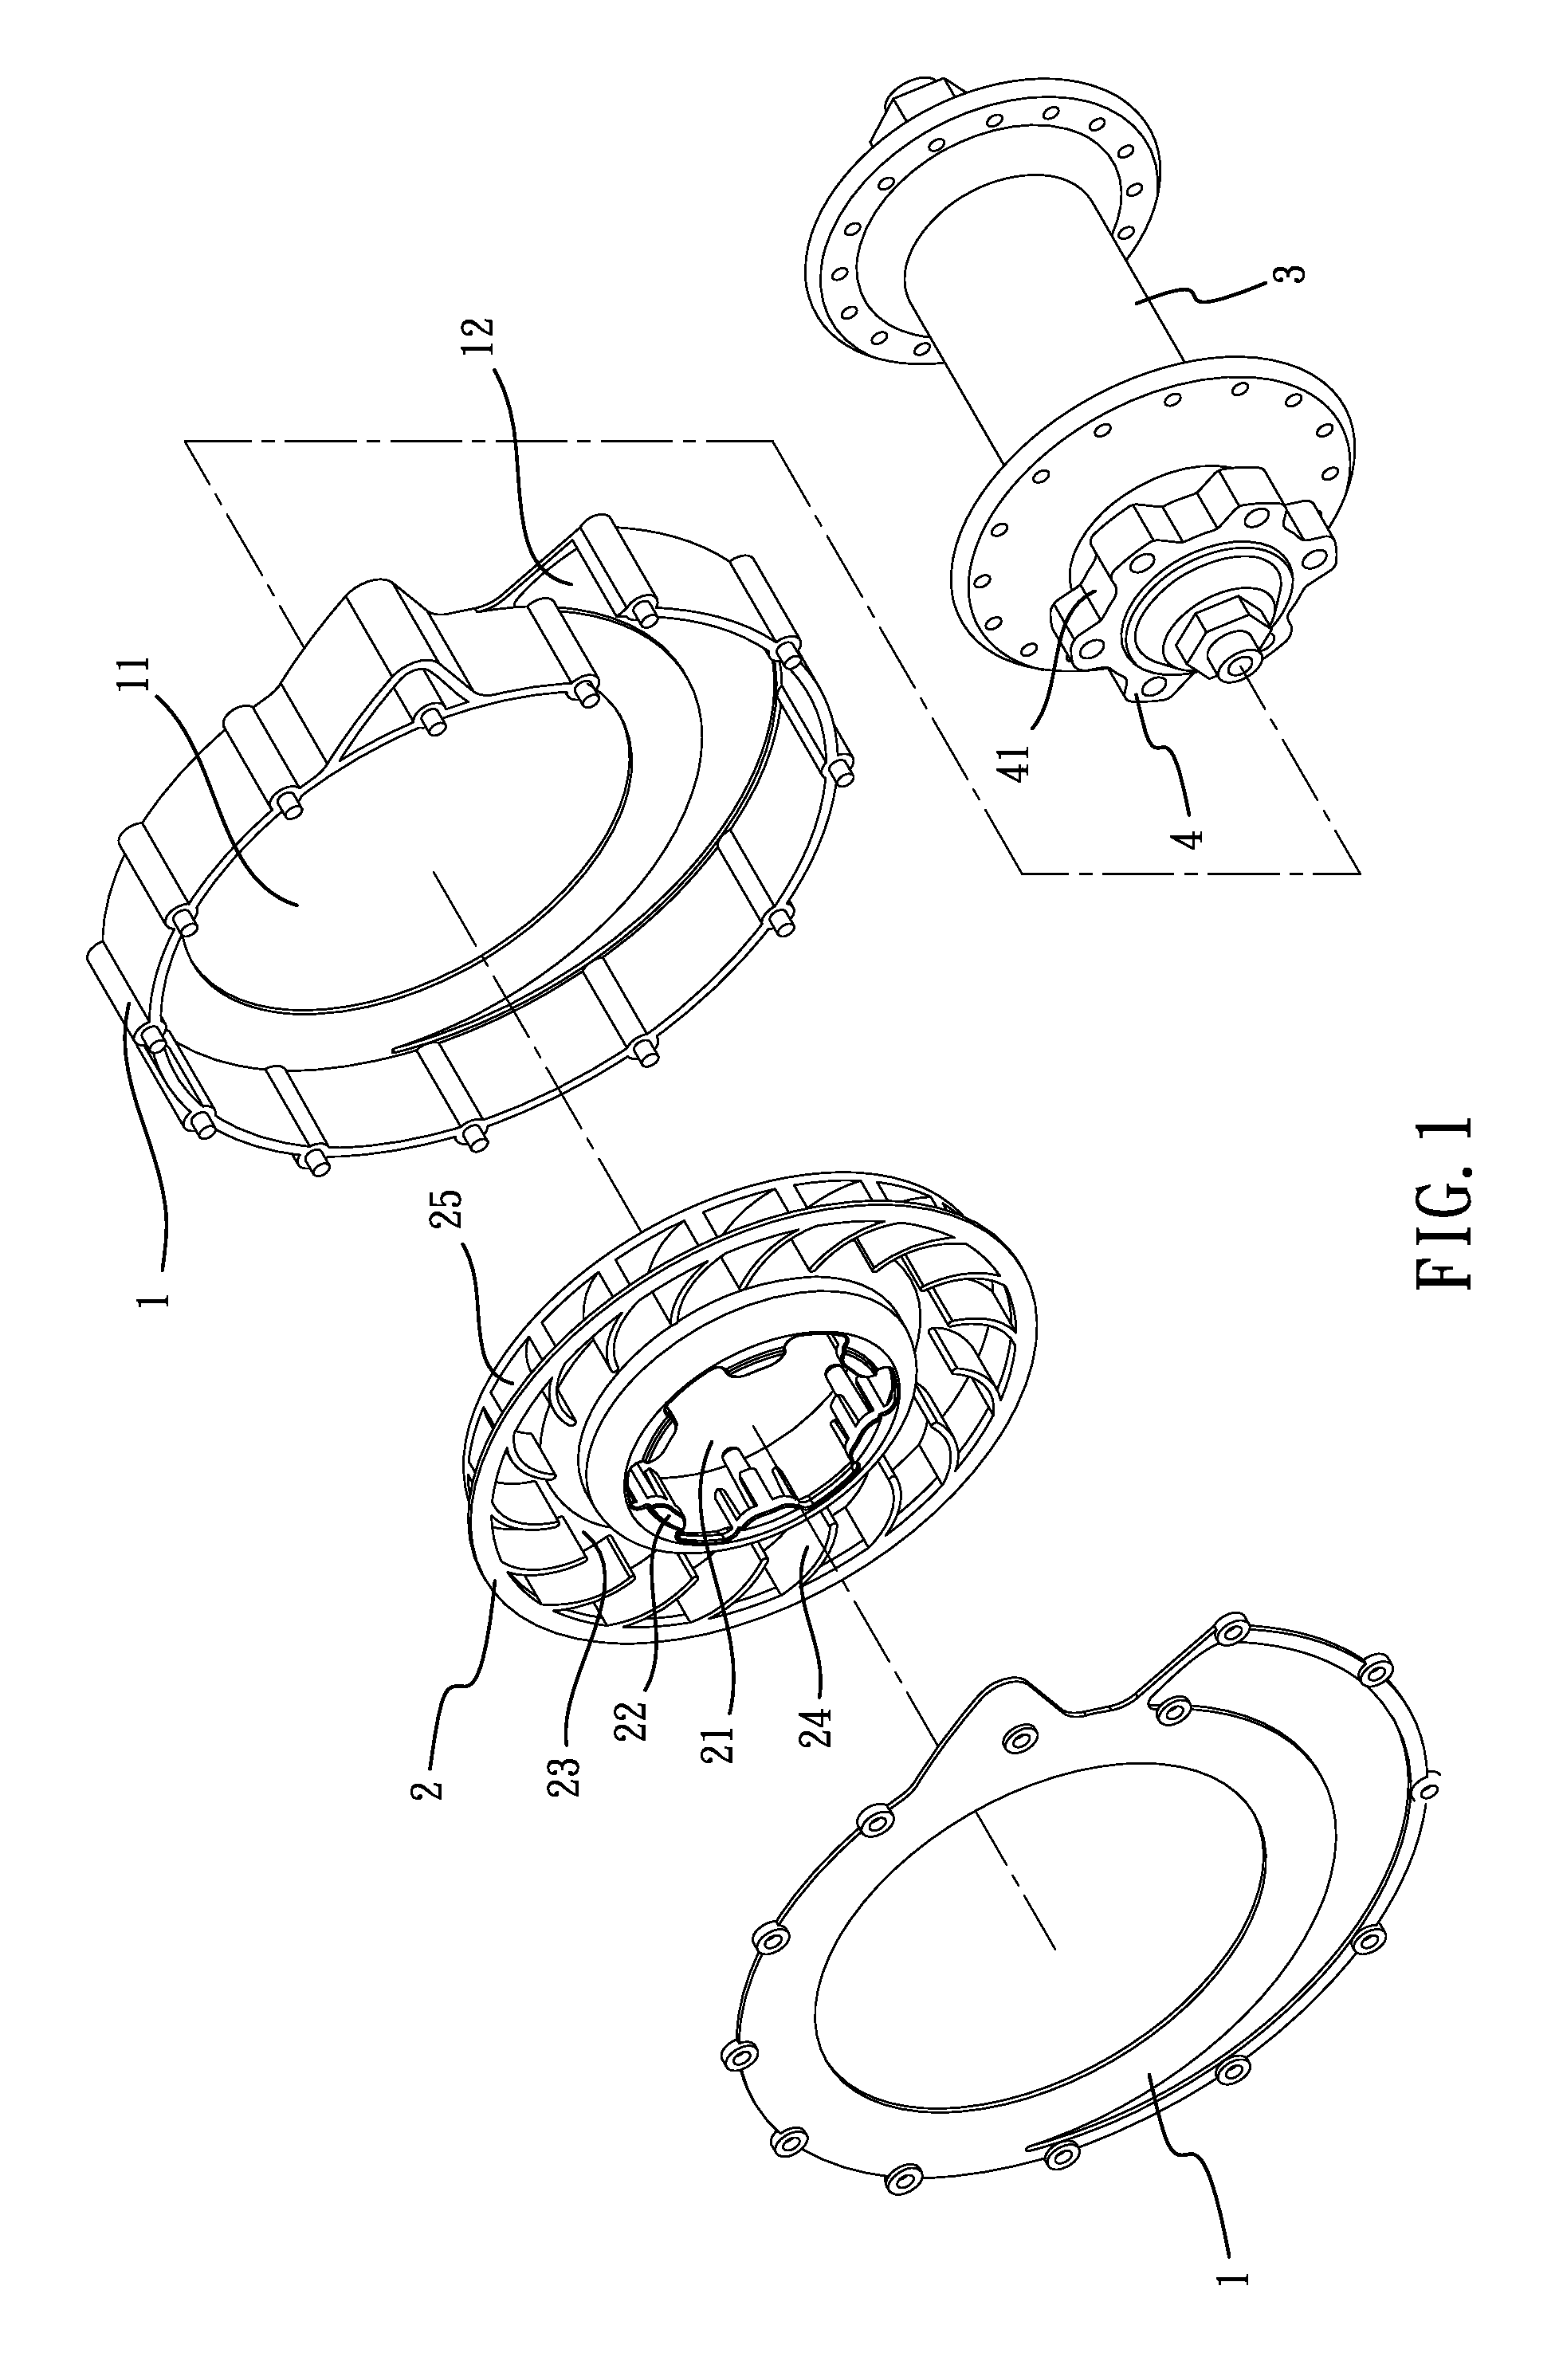 Cooling device for hydraulic braking systems